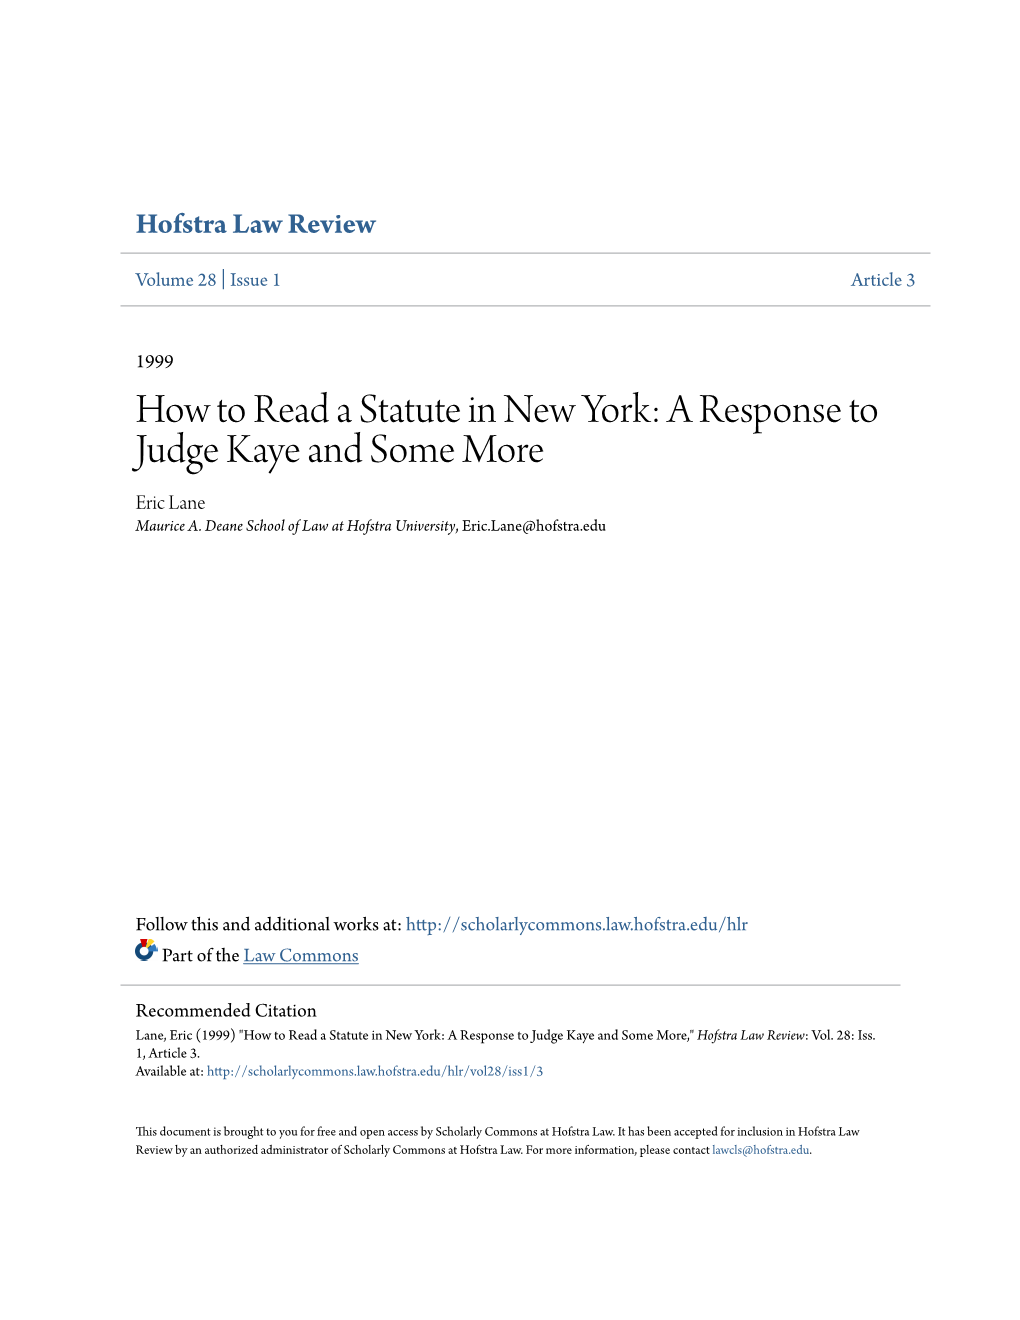 How to Read a Statute in New York: a Response to Judge Kaye and Some More Eric Lane Maurice A